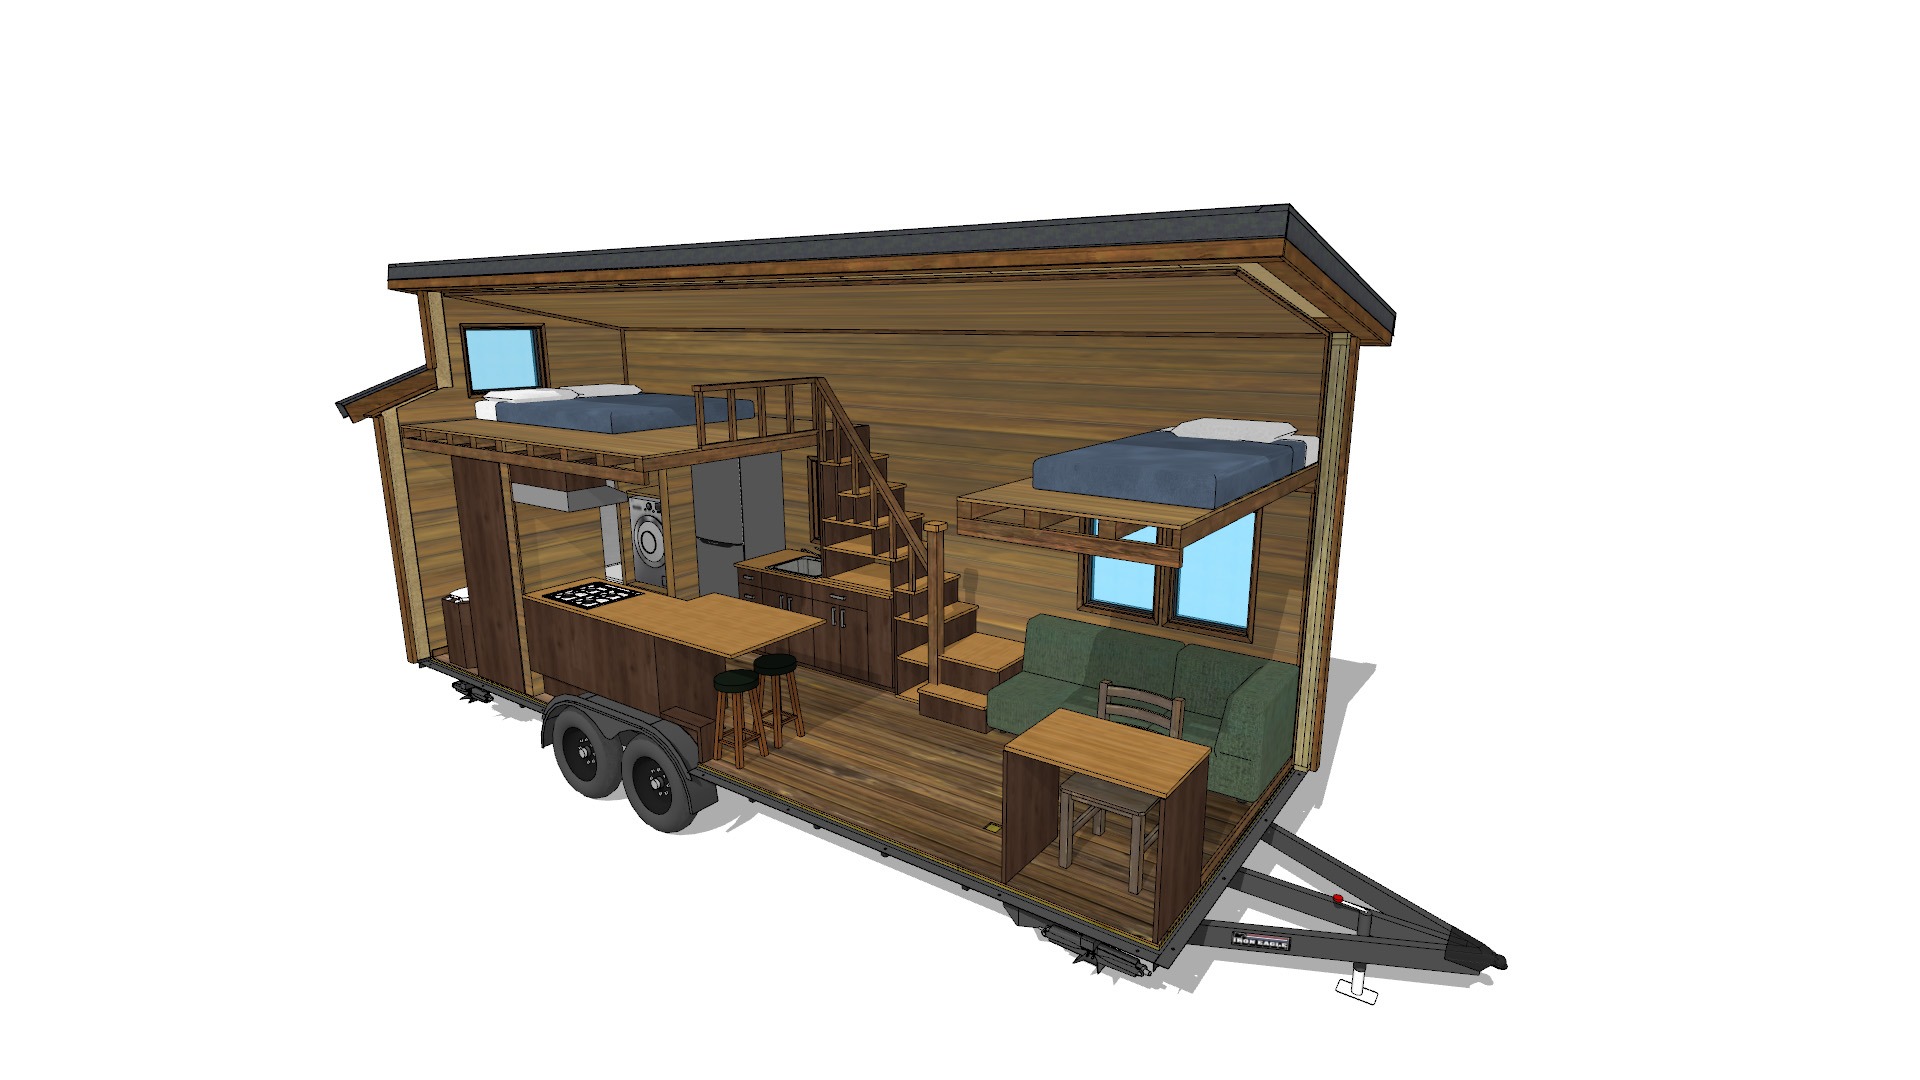 Design A Tiny House On Wheels Tips And Tools For Diyers